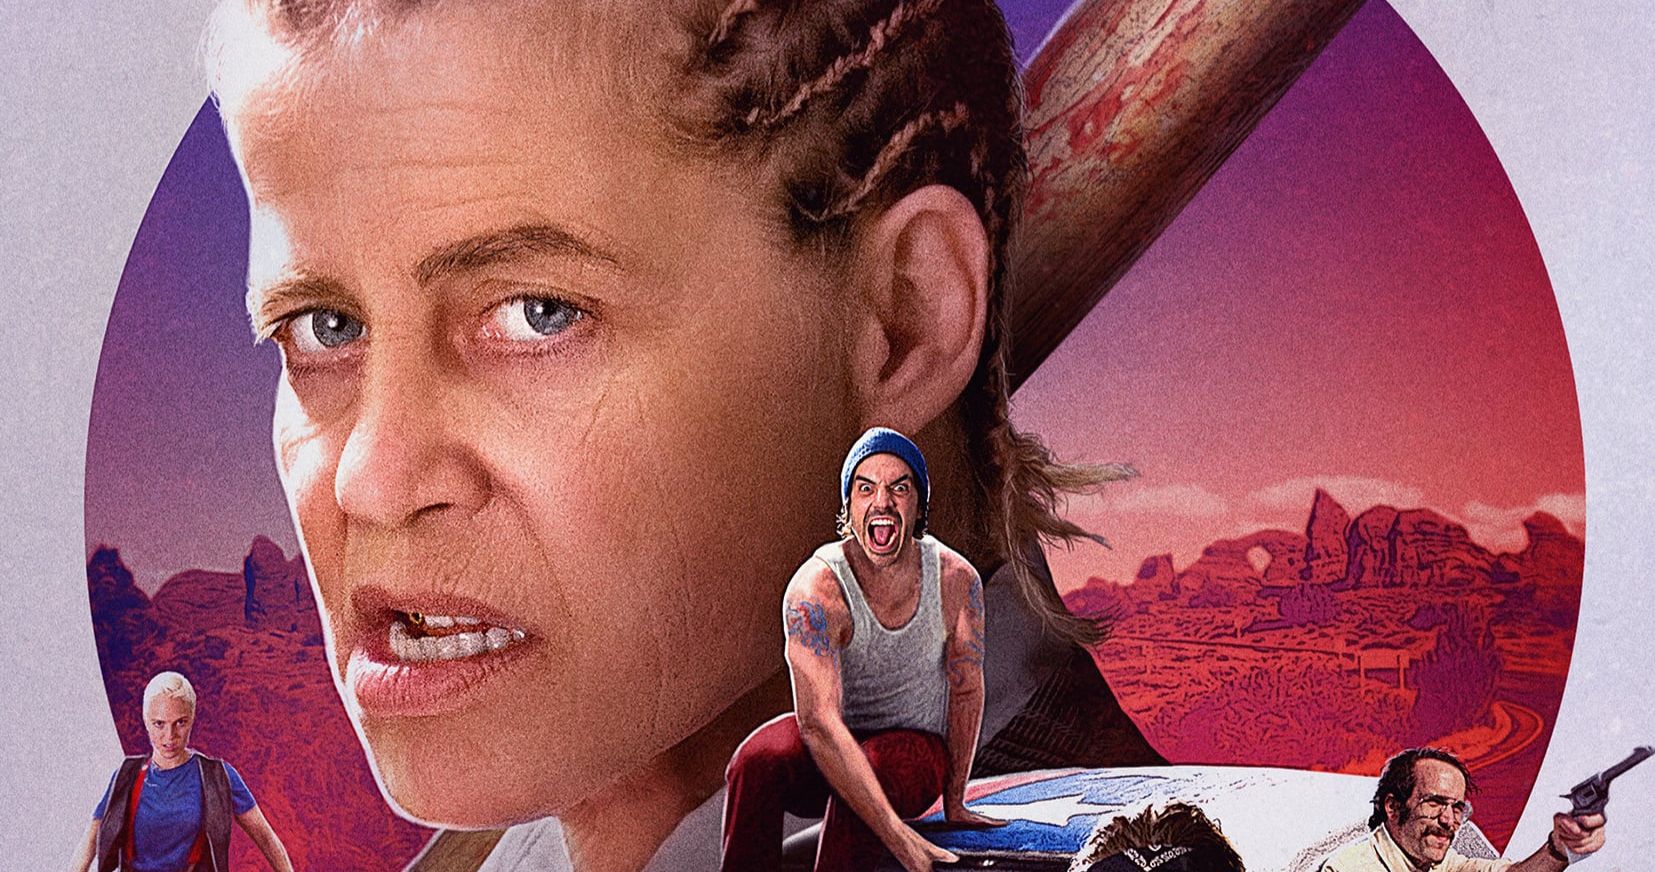 Linda Hamilton Is Back in Easy Does It Trailer